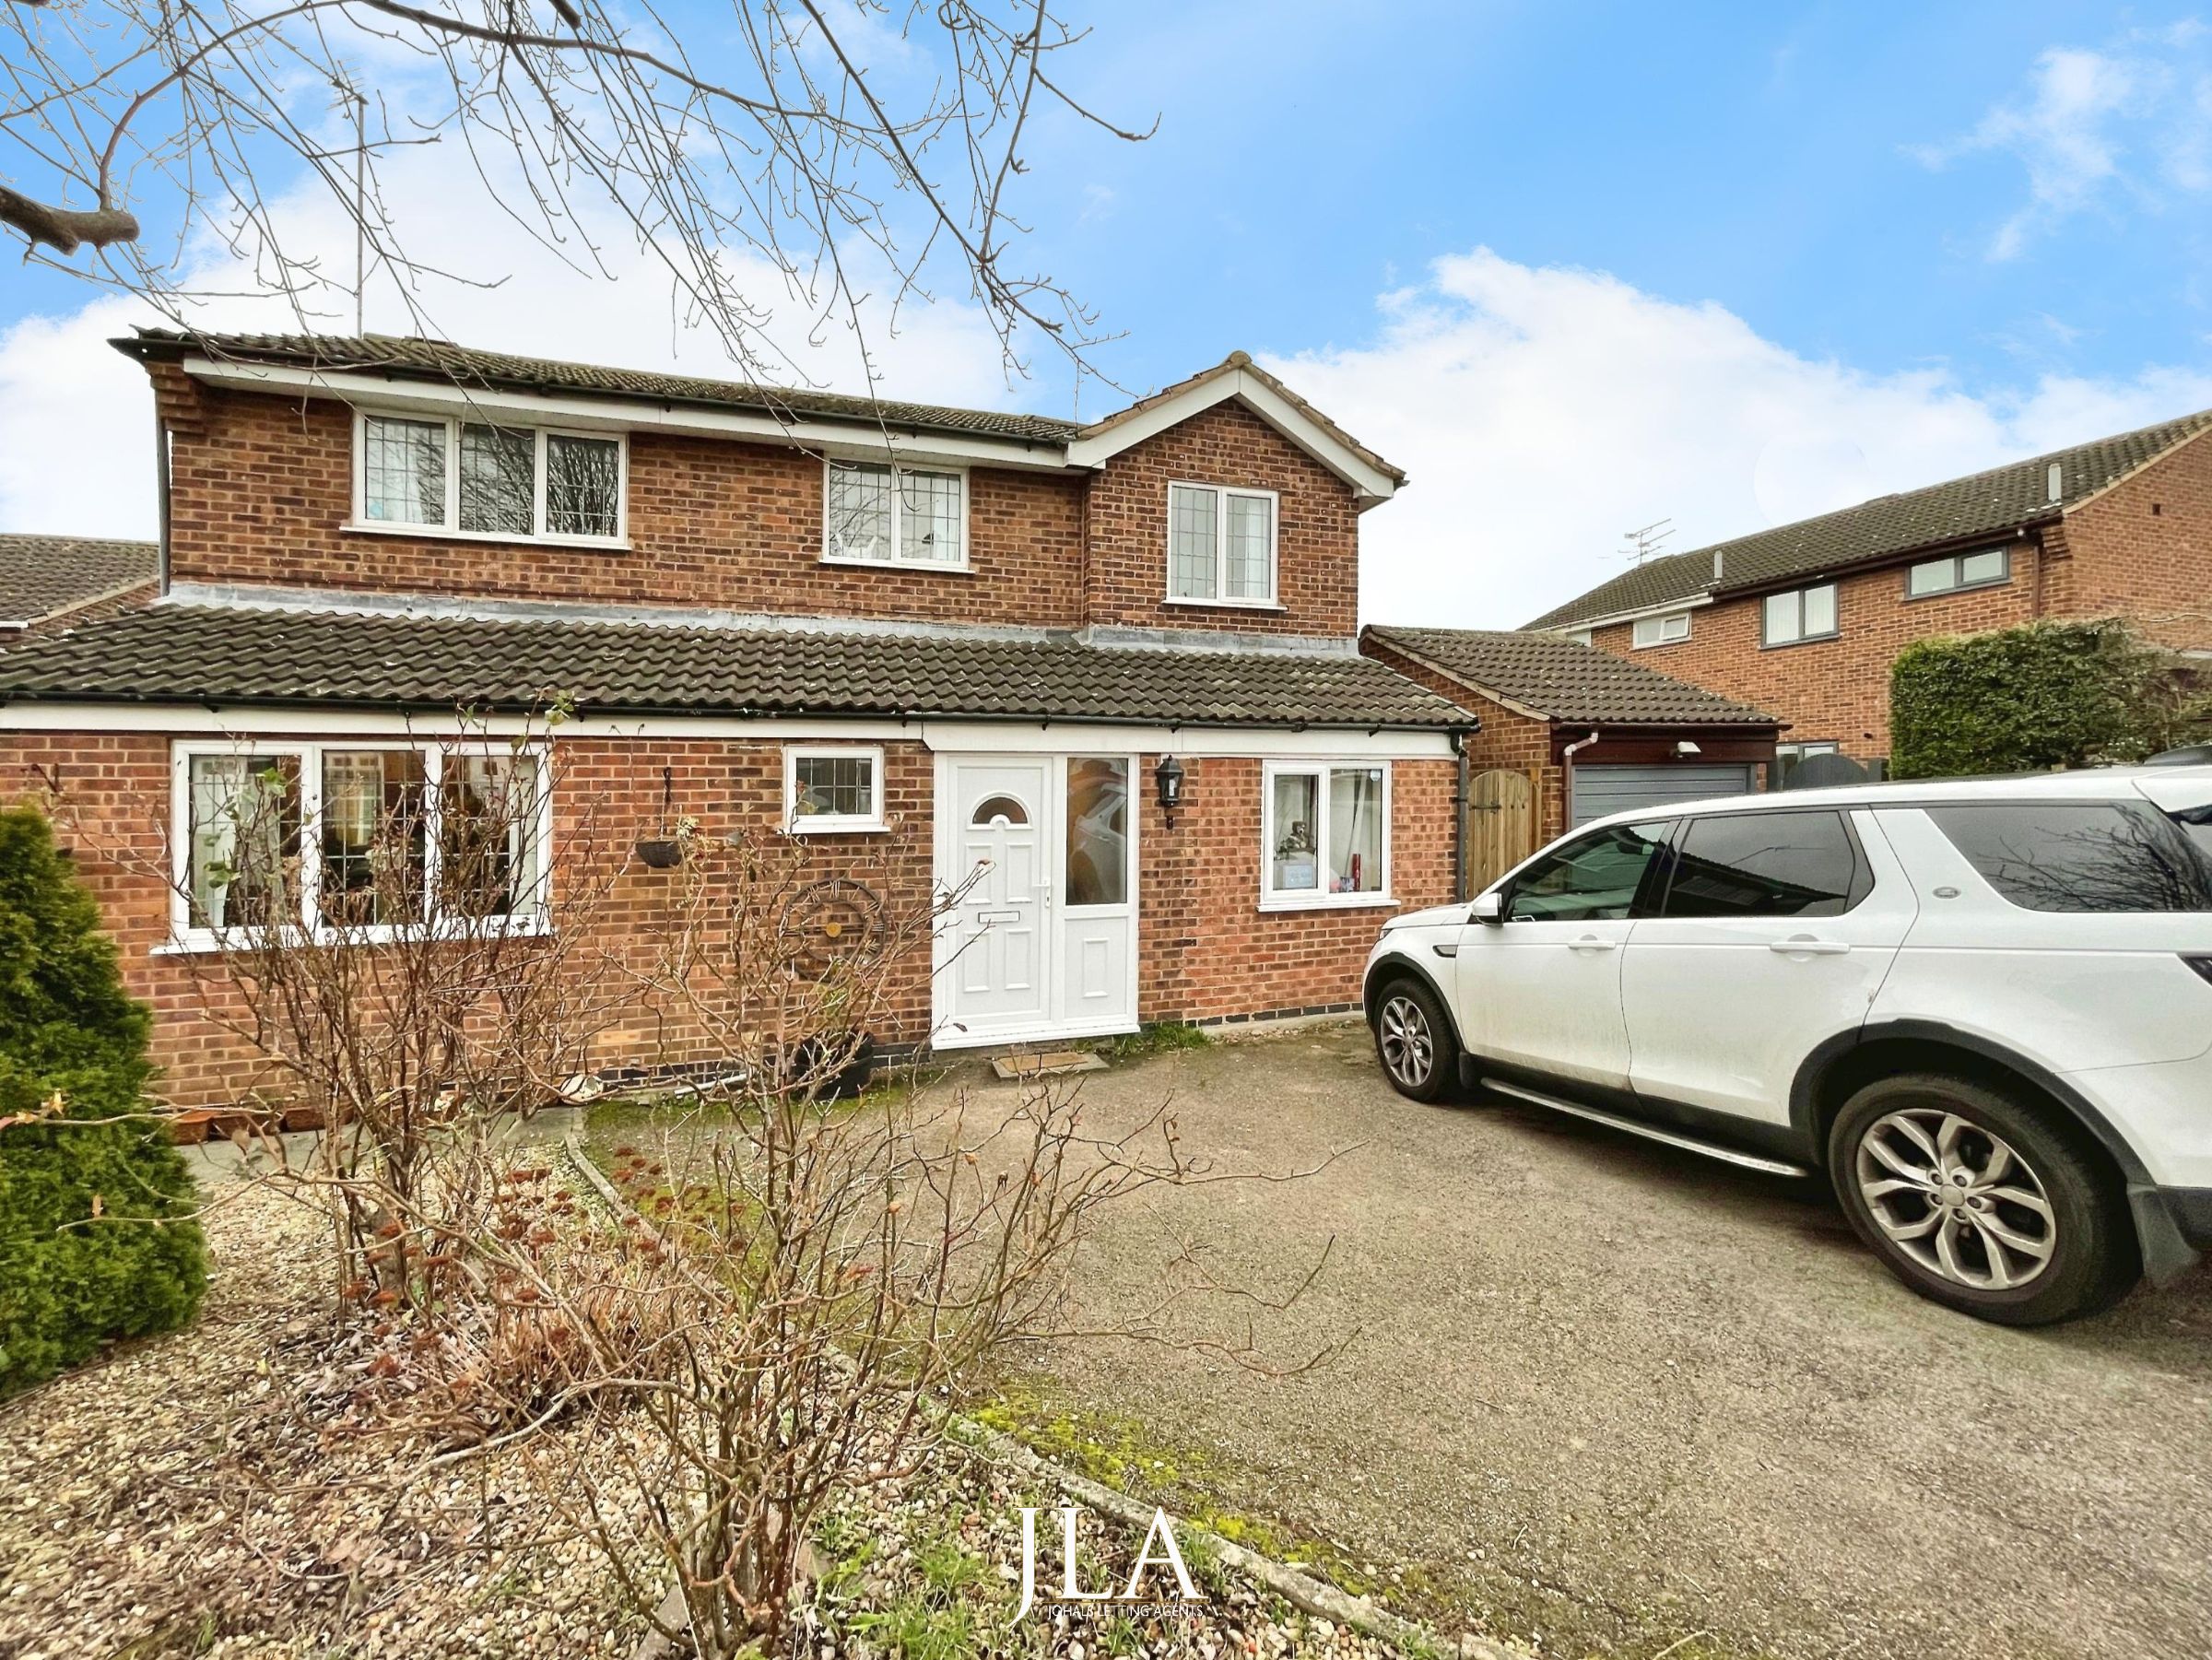 4 bed detached house to rent in Ludlow Close, Leicester, LE2 